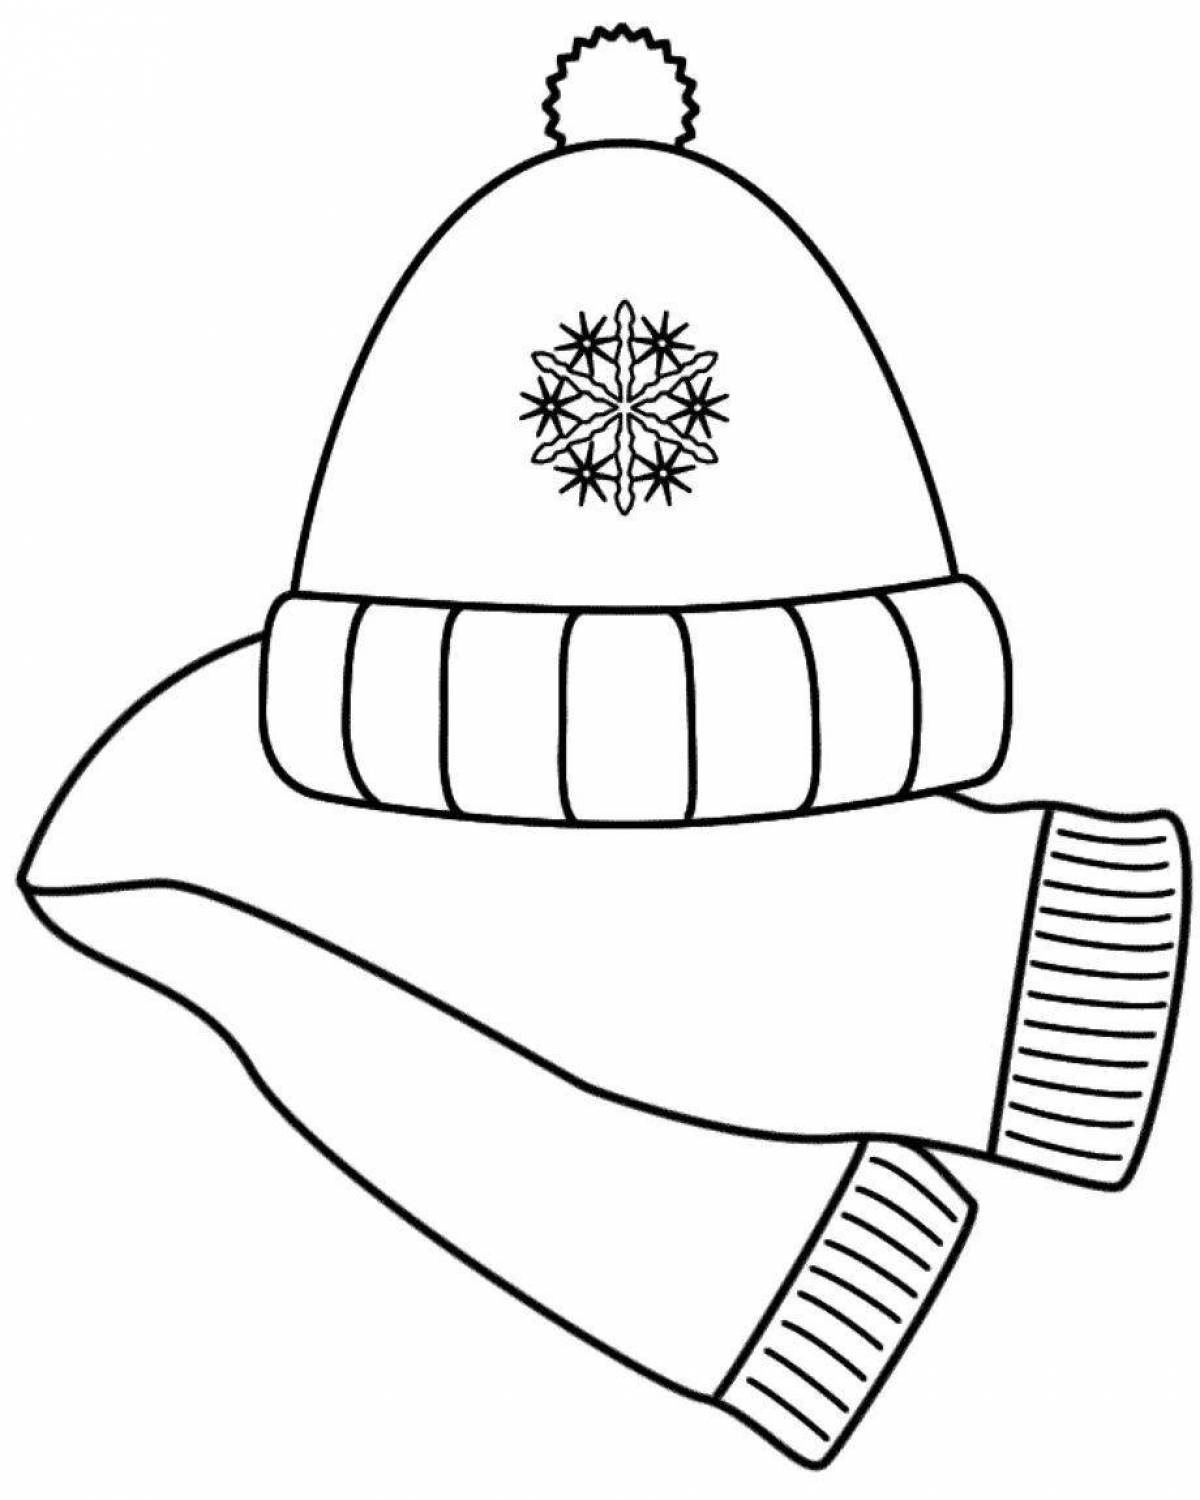 Witty hat and scarf coloring book